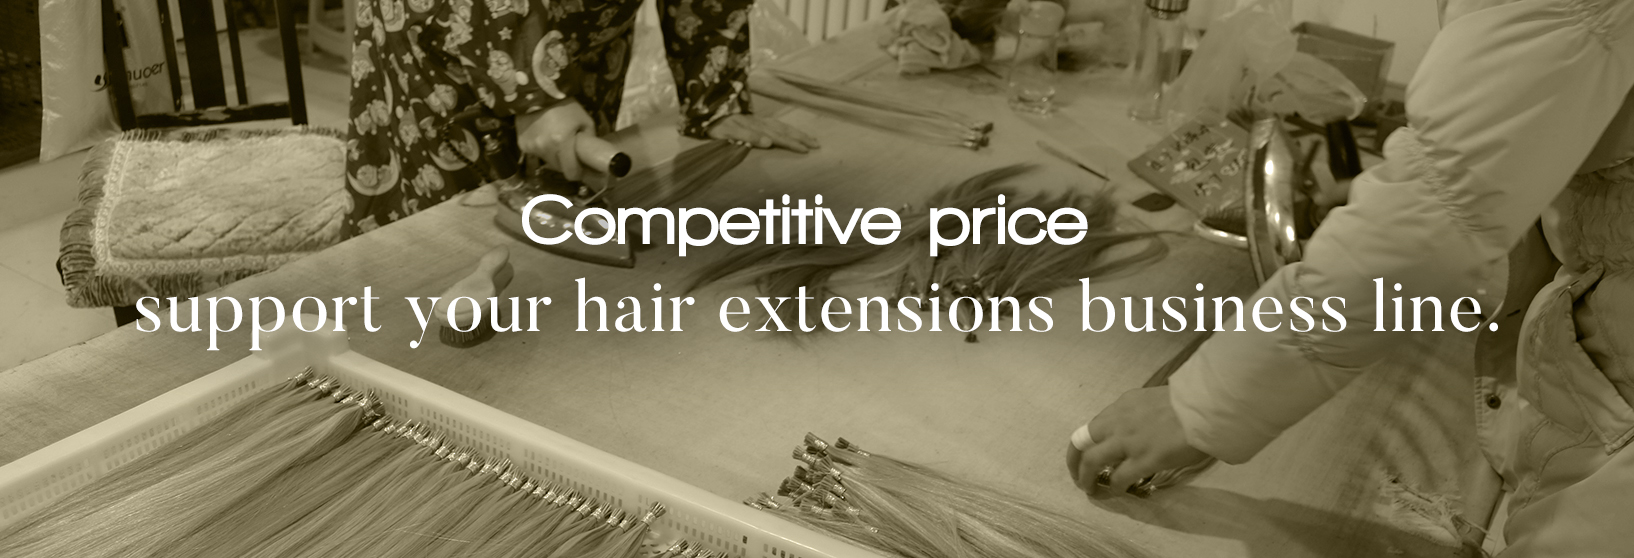 Wholesale hair extensions